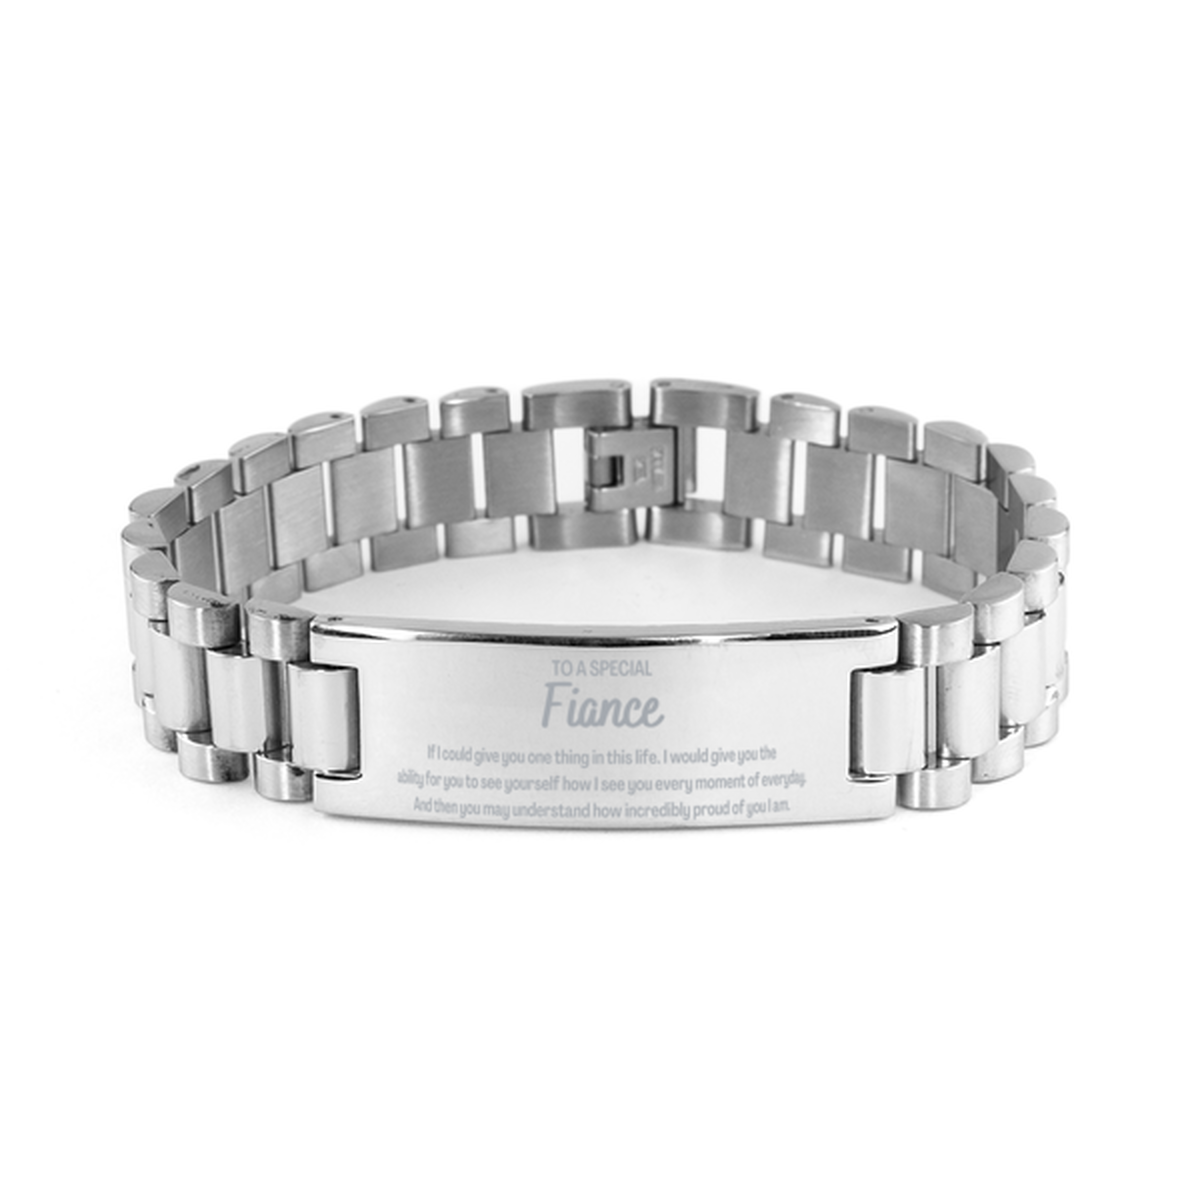 To My Fiance Ladder Stainless Steel Bracelet, Gifts For Fiance Engraved, Inspirational Gifts for Christmas Birthday, Epic Gifts for Fiance To A Special Fiance how incredibly proud of you I am